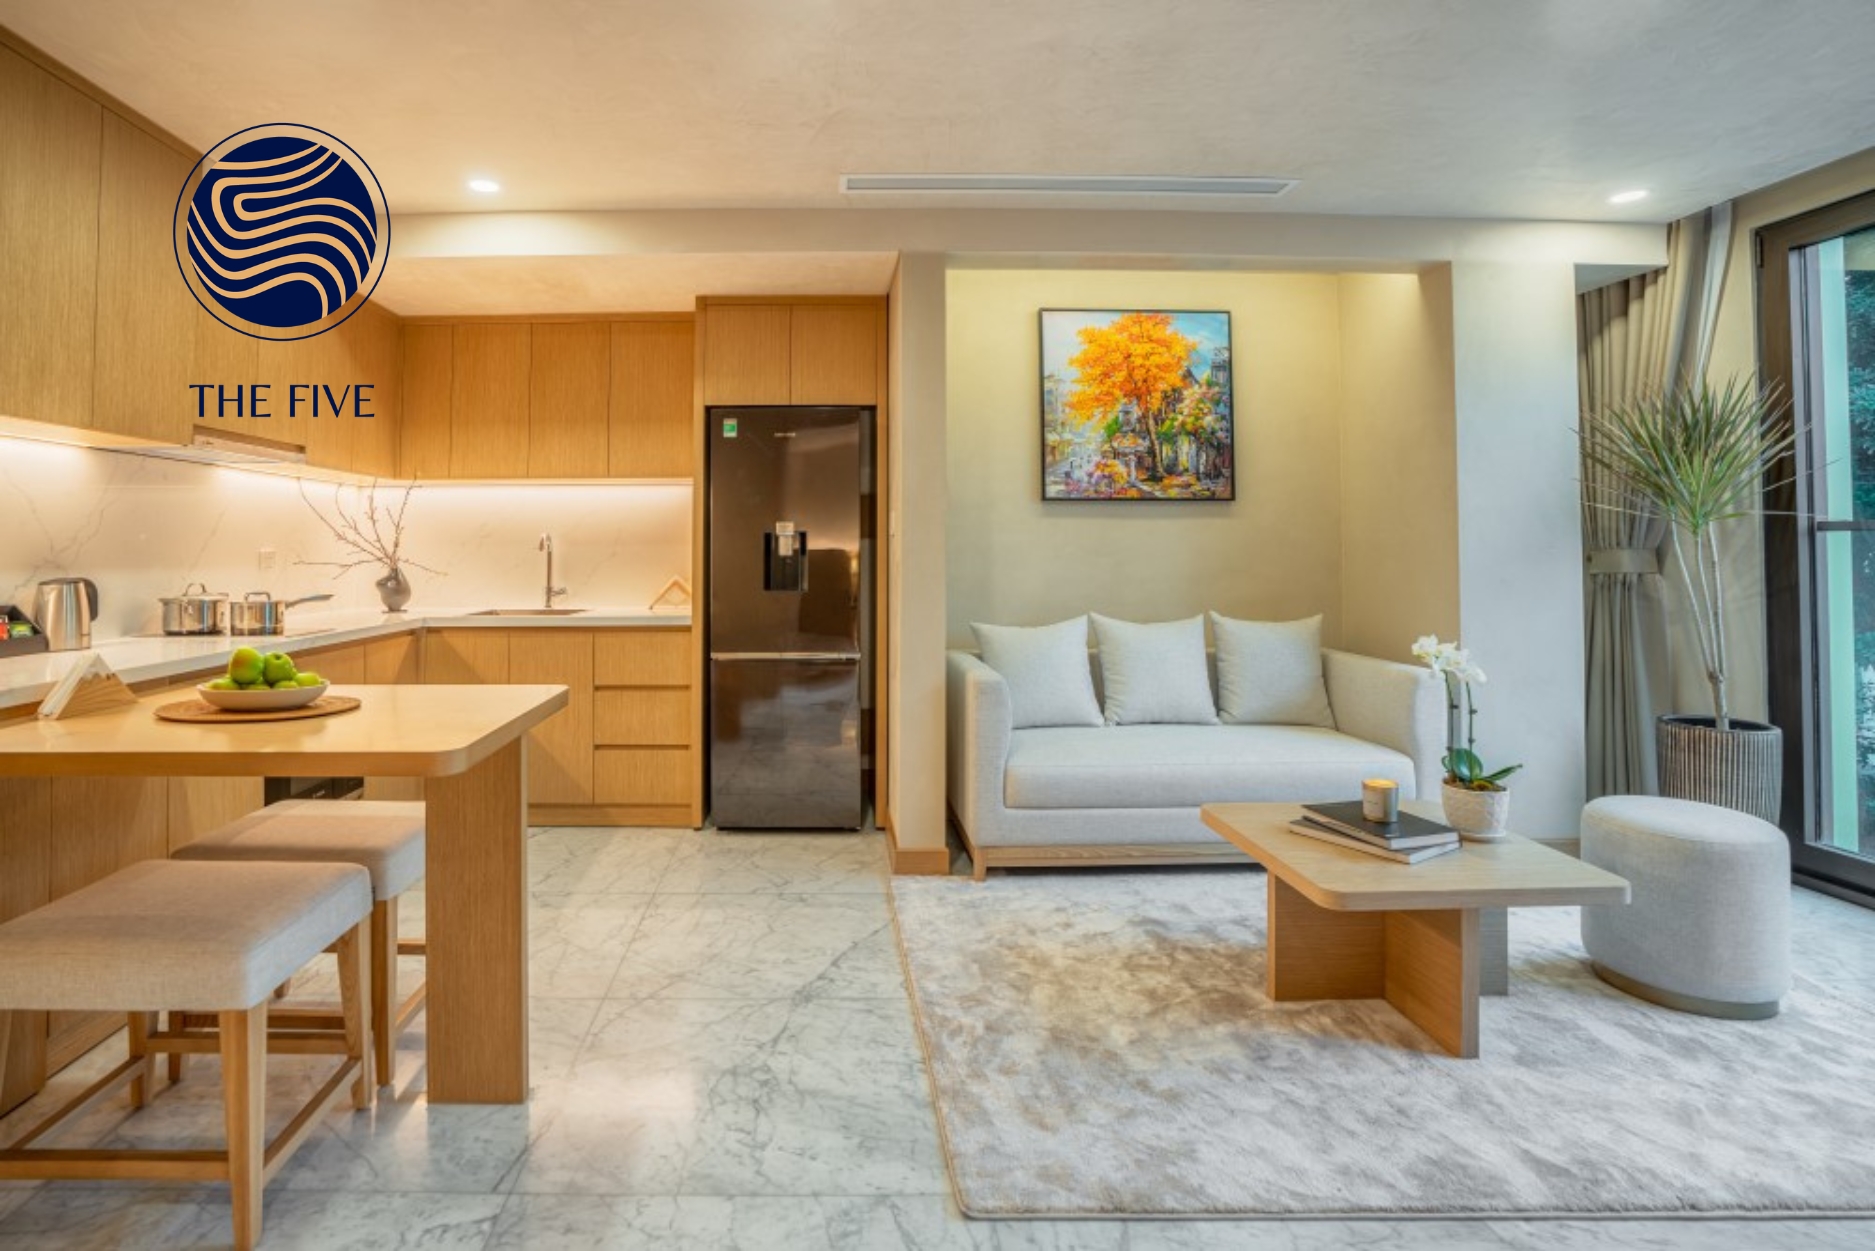 The Five Lilas – a luxe apartment hotel developed by The Five brand officially put into operation the NEC PABX at No. 9, Nguyen Bieu Street, Ba Dinh District, Hanoi